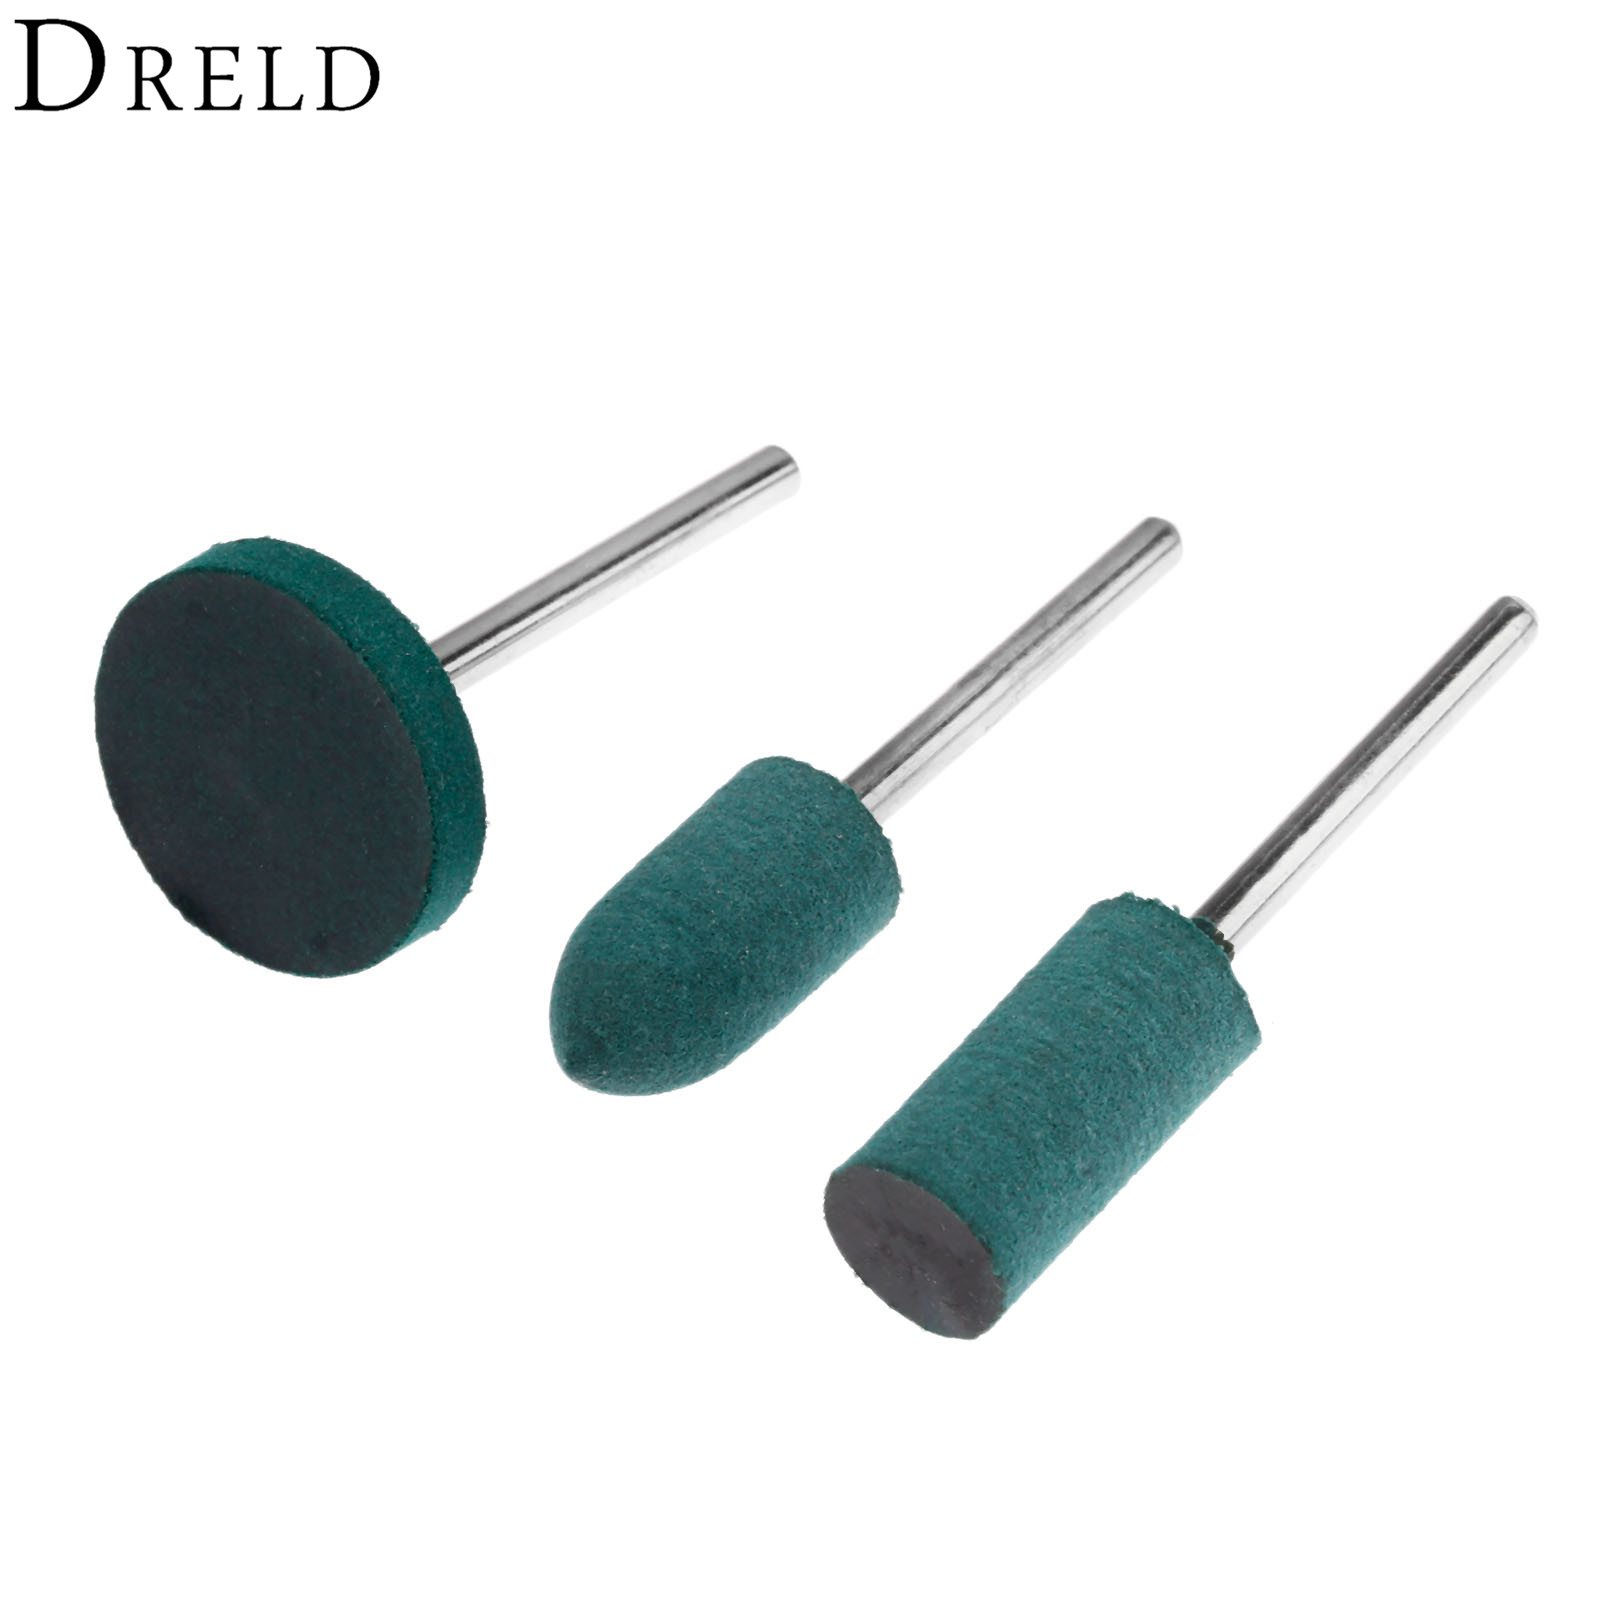 DRELD 3Pcs/set Rubber Grinding Head Polishing Buffing Wheel for Electric Mini Grinder Dremel Rotary Tools Cylinder+Bullet+T Type